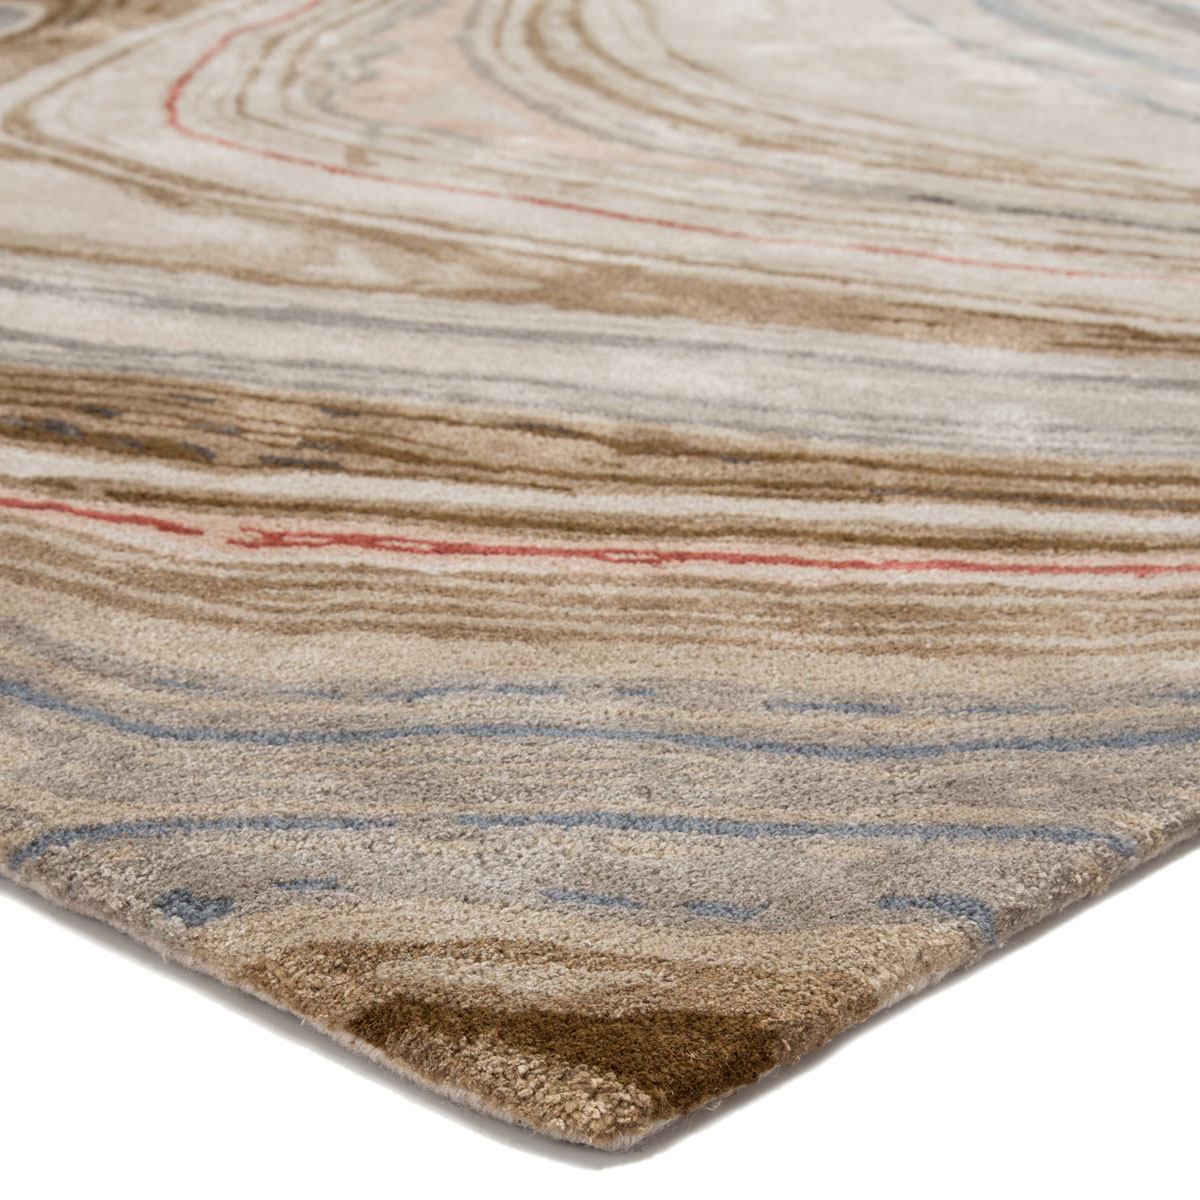 Ptolemaios II Area Rug - 7'10" X 10'10" - Brown/Red